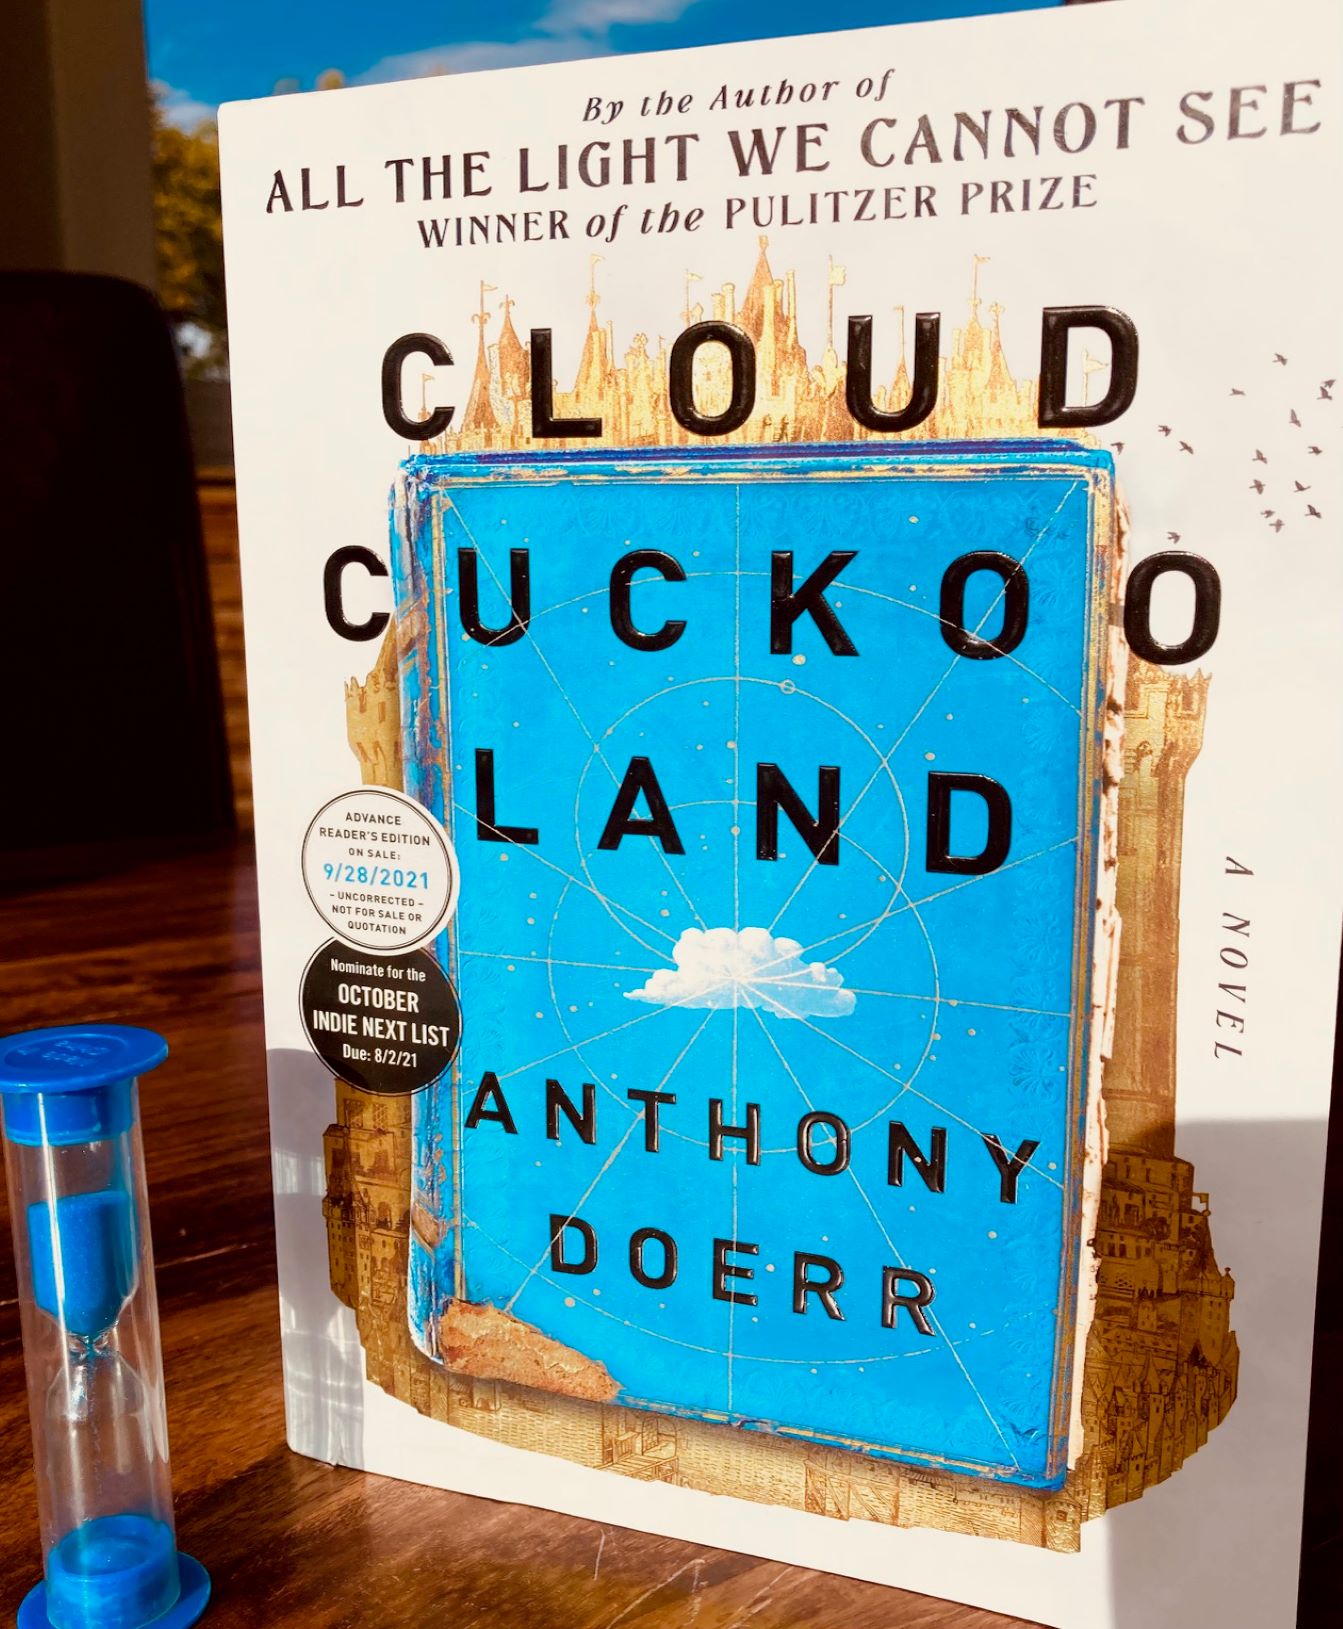 Cloud Cuckoo Land by Anthony Doerr book standing up next to a small hourglass filled with blue sand